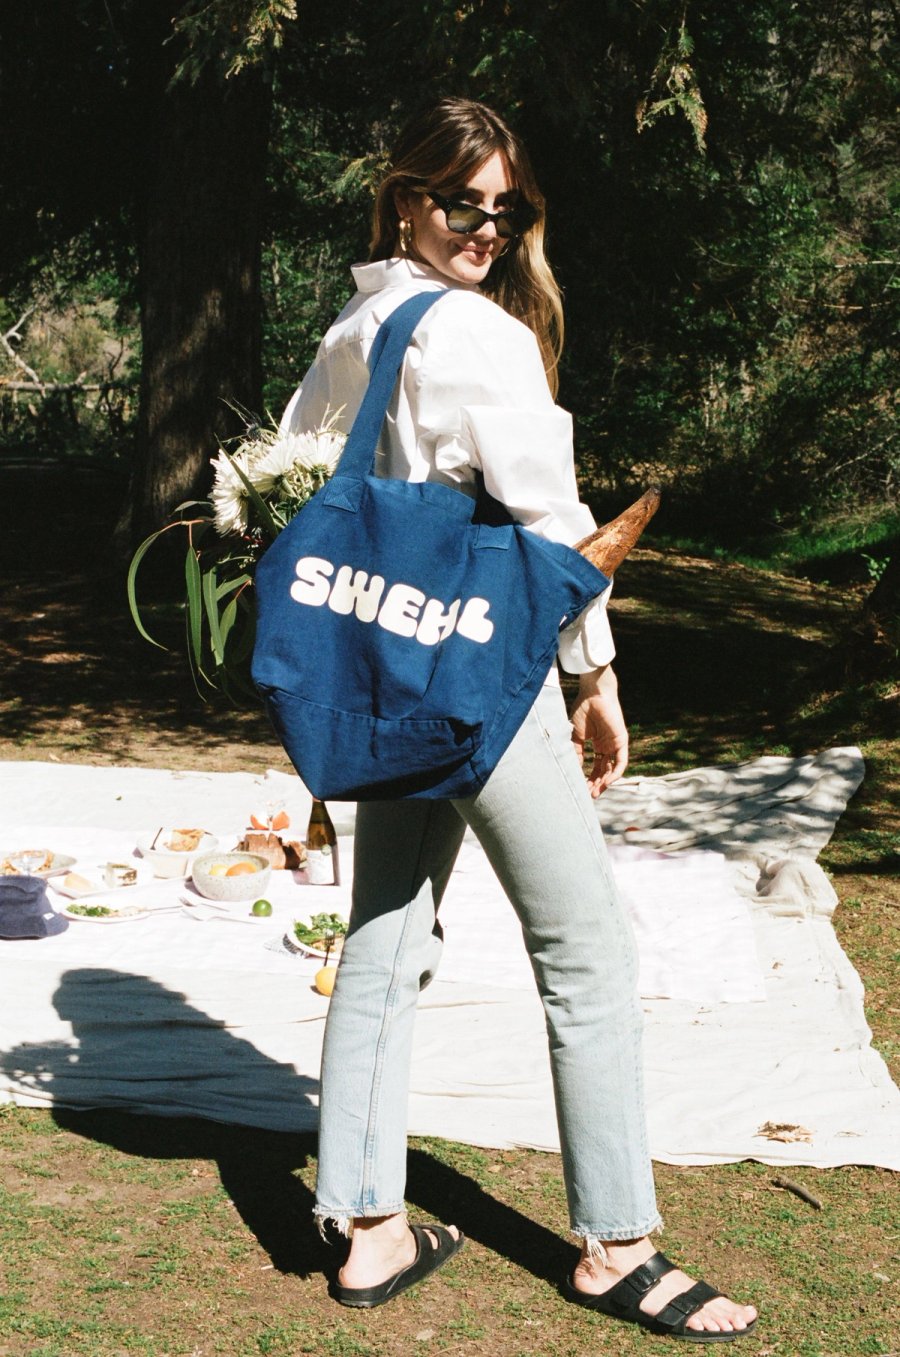 a woman carrying a blue tote bag and flowers